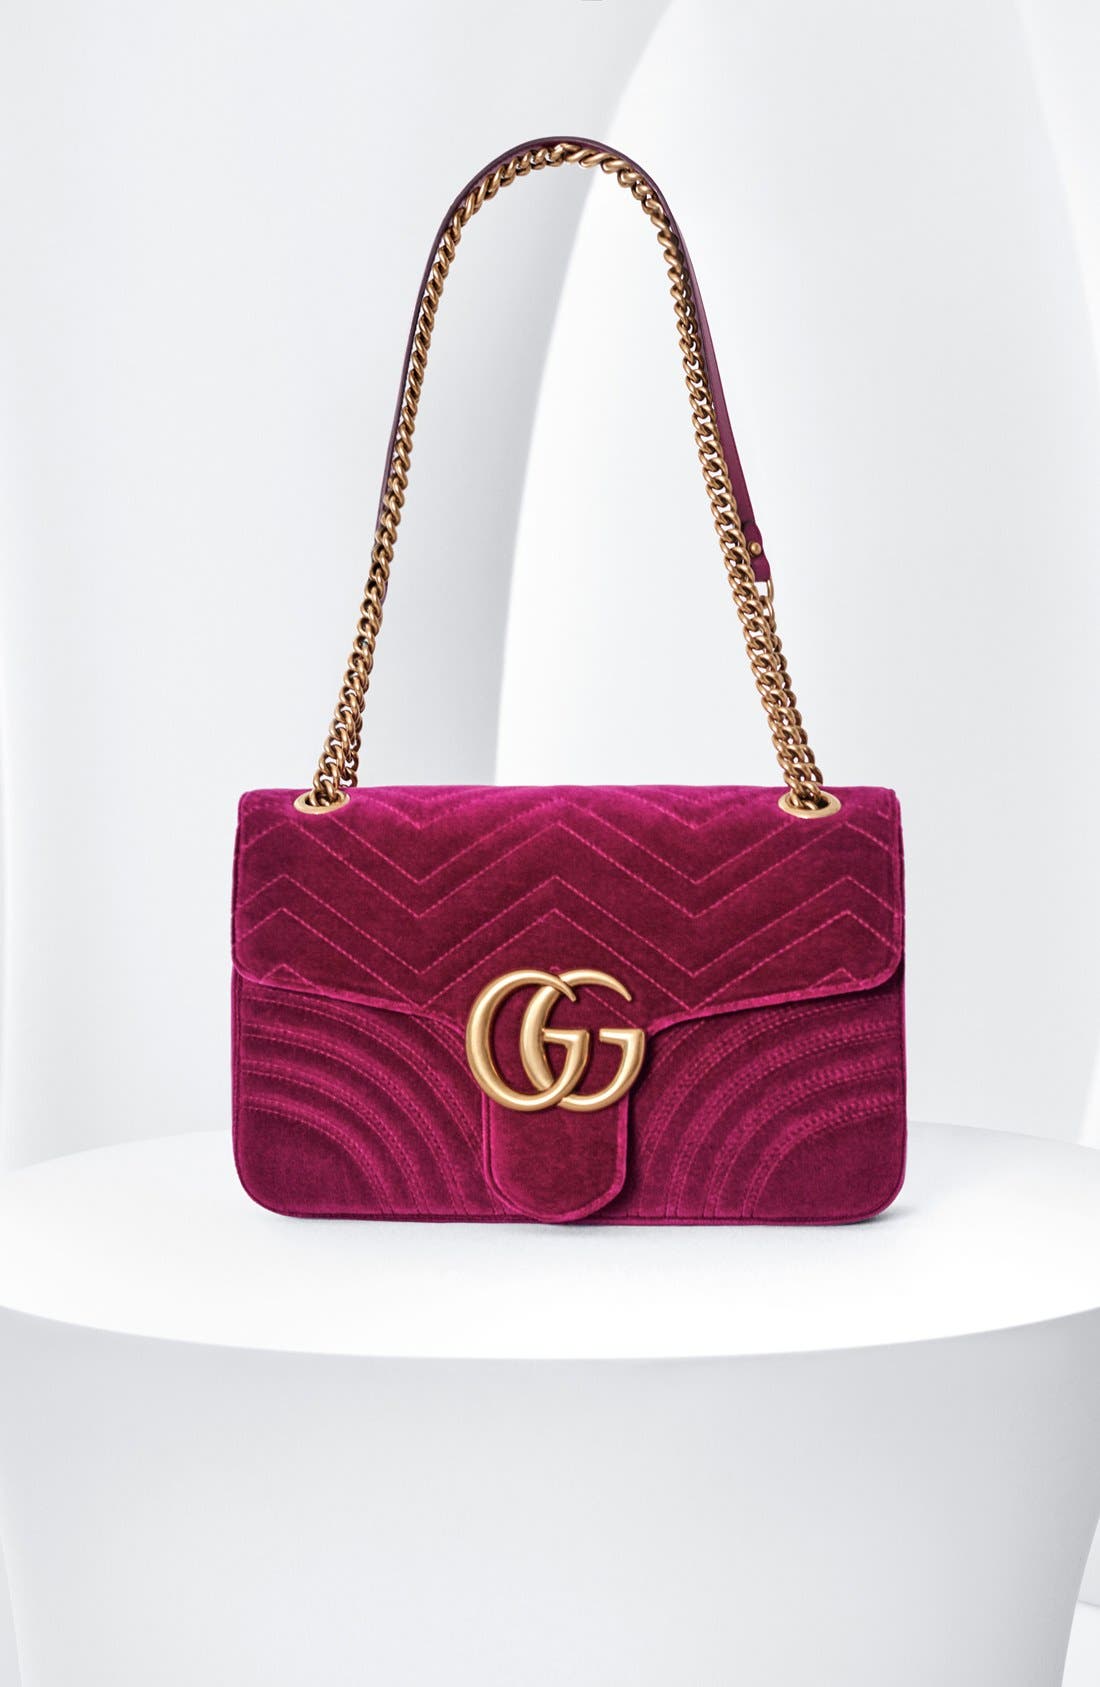 GUCCI Gg Marmont 2.0 Suede Shoulder Bag, Fuchsia , Red/Brown | ModeSens